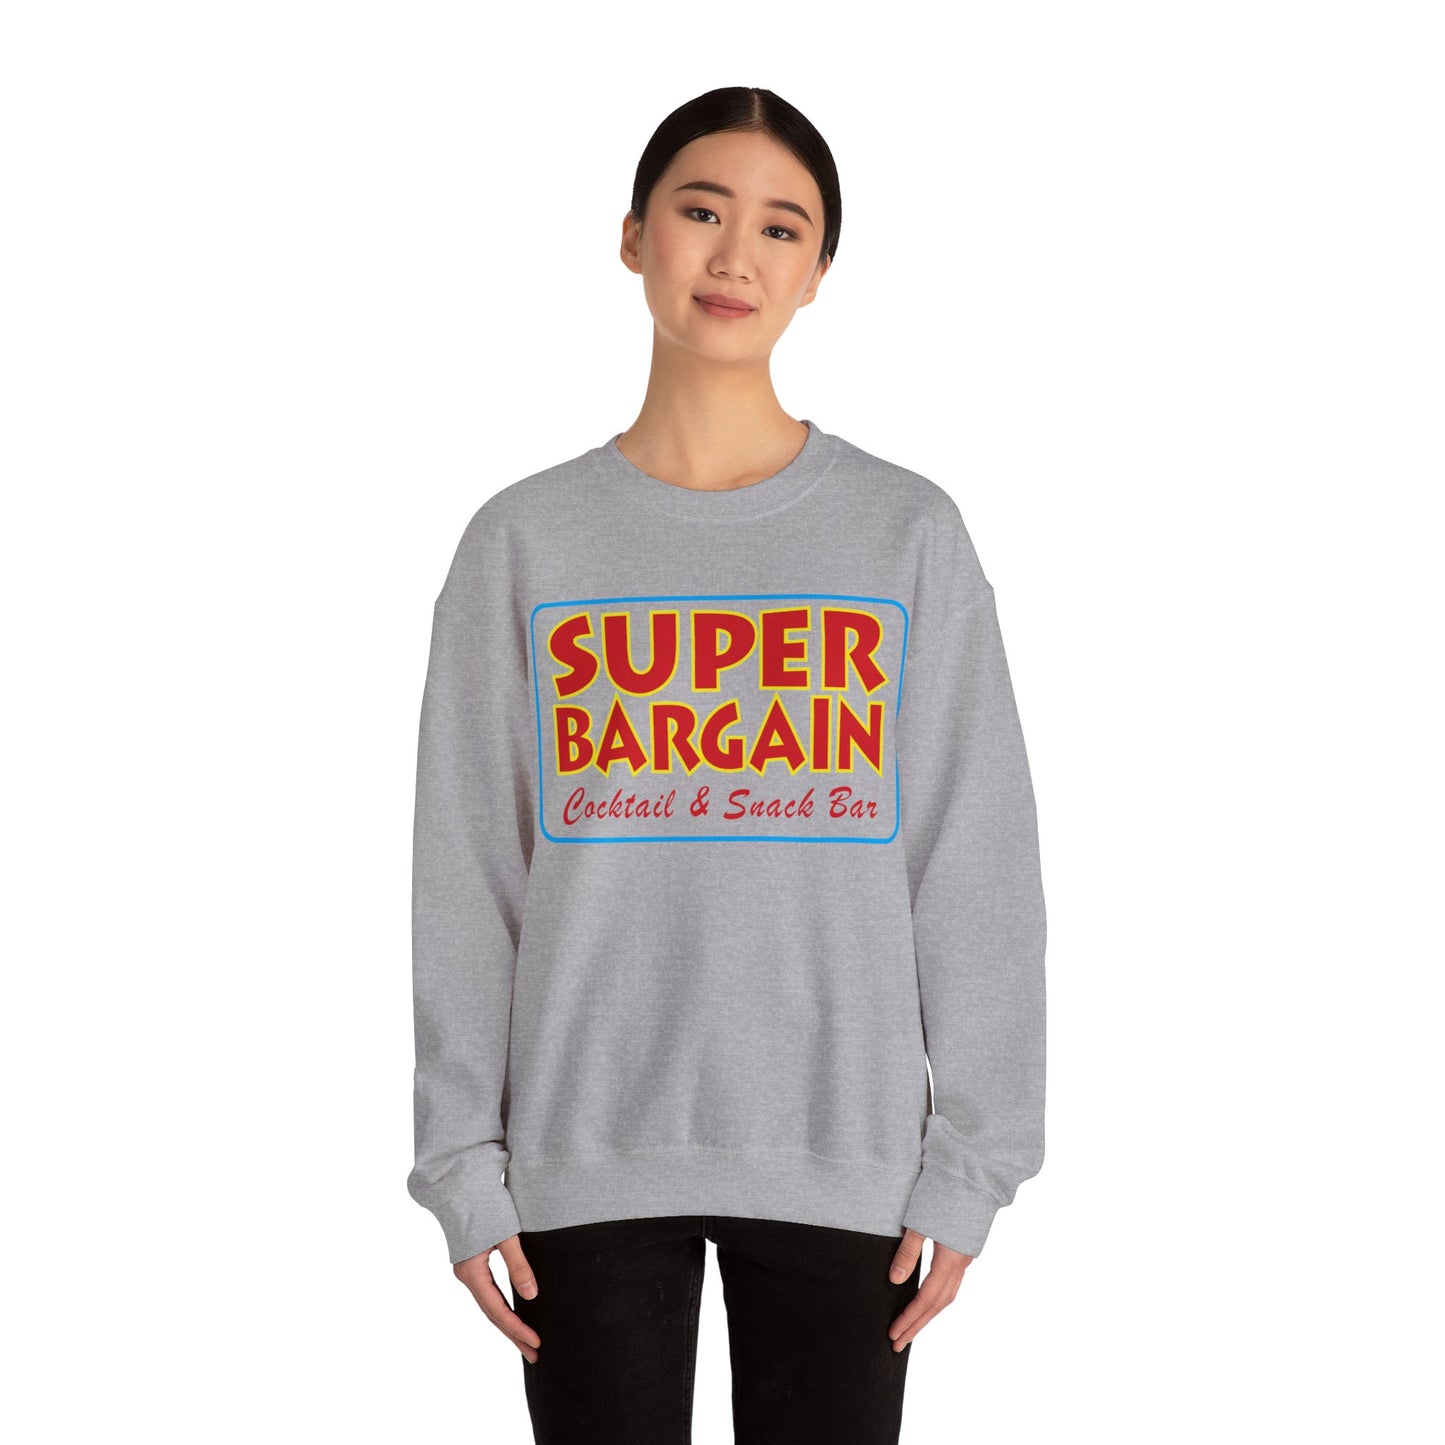 A young woman wearing a gray Unisex Heavy Blend™ Crewneck Signature Logo Sweatshirt by Printify that reads "SUPER BARGAIN Cocktail & Snack Bar" in colorful letters. She appears calm, with a slight smile, and stands against a white background in Cabbagetown, Toronto.